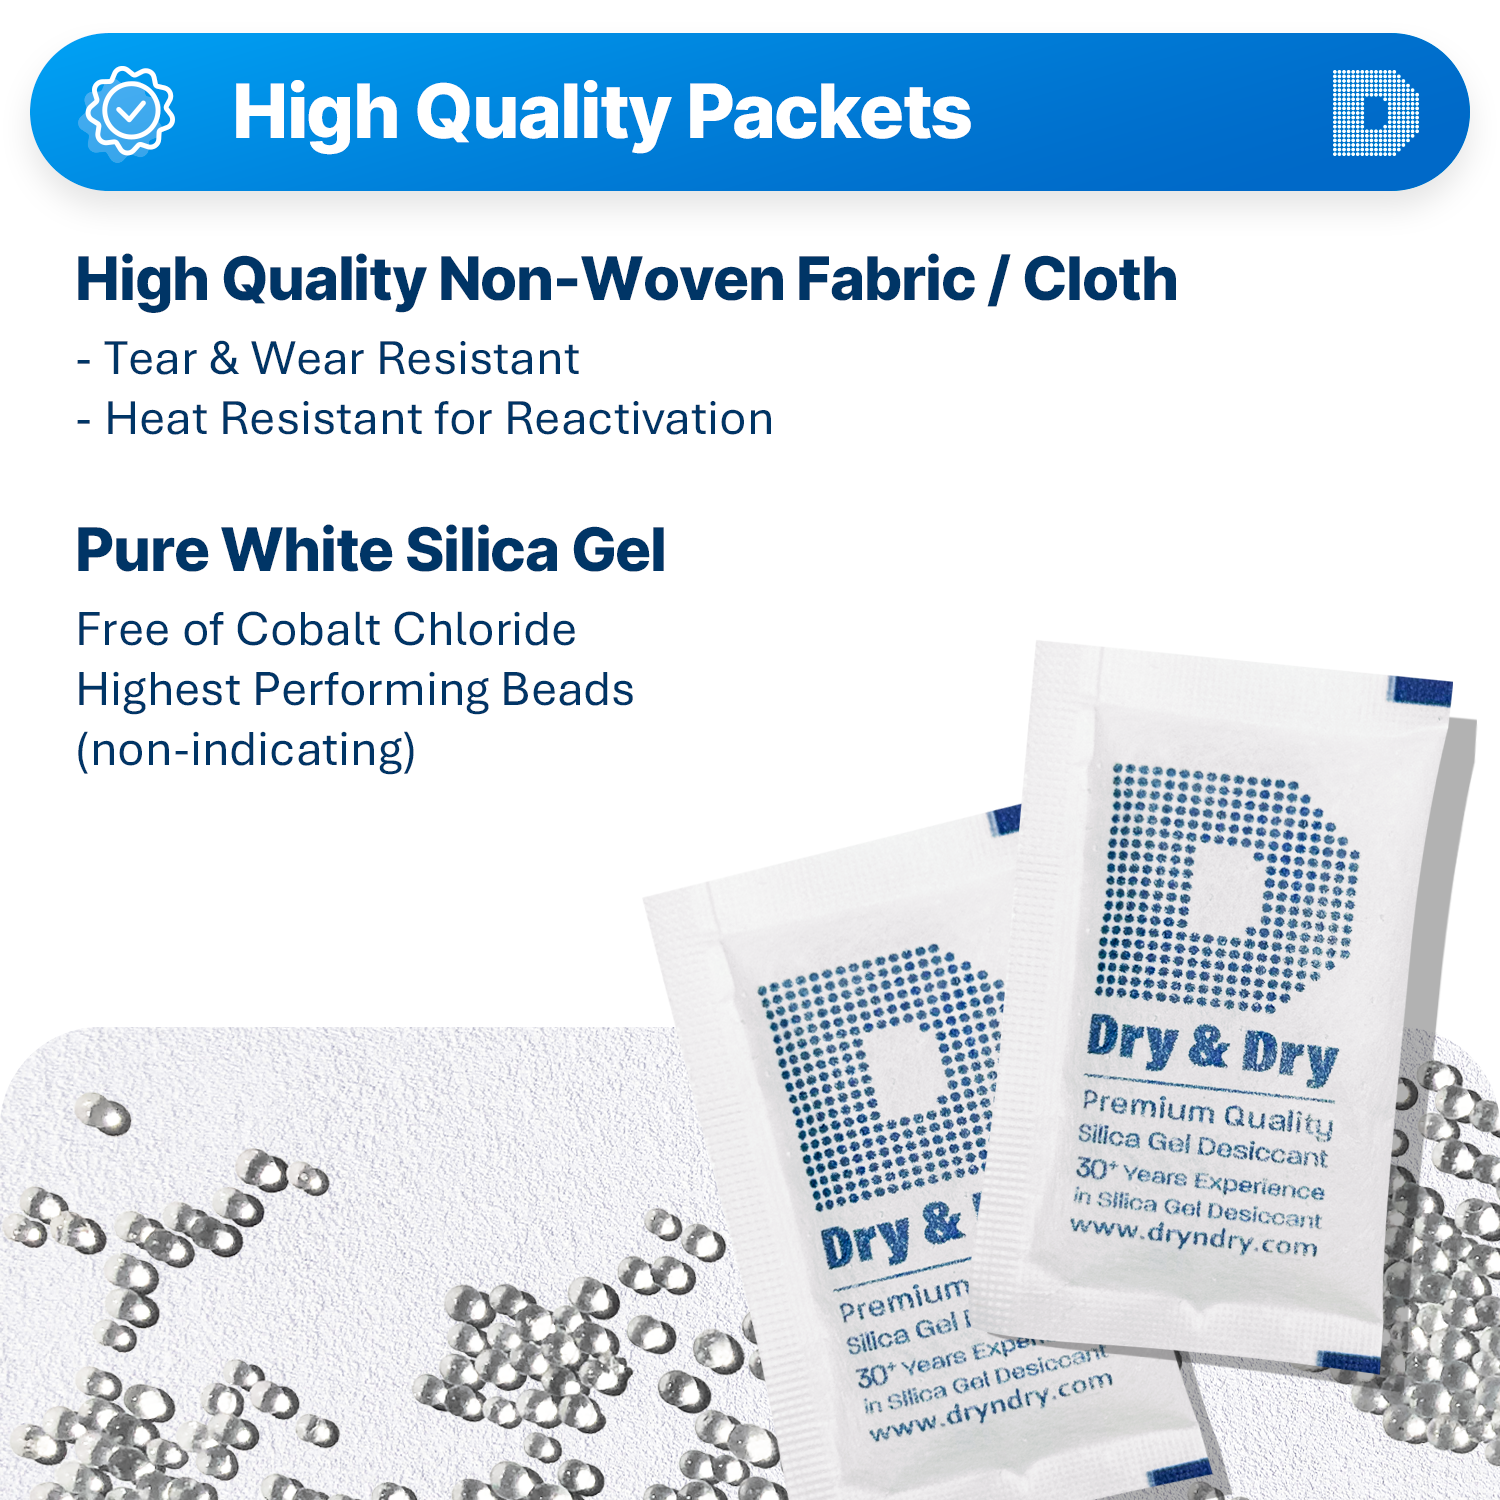 10 Gram [1700 Packets] Dry & Dry Premium Silica Gel Desiccant Packets -  Rechargeable Non-Woven Fabric (Cloth)